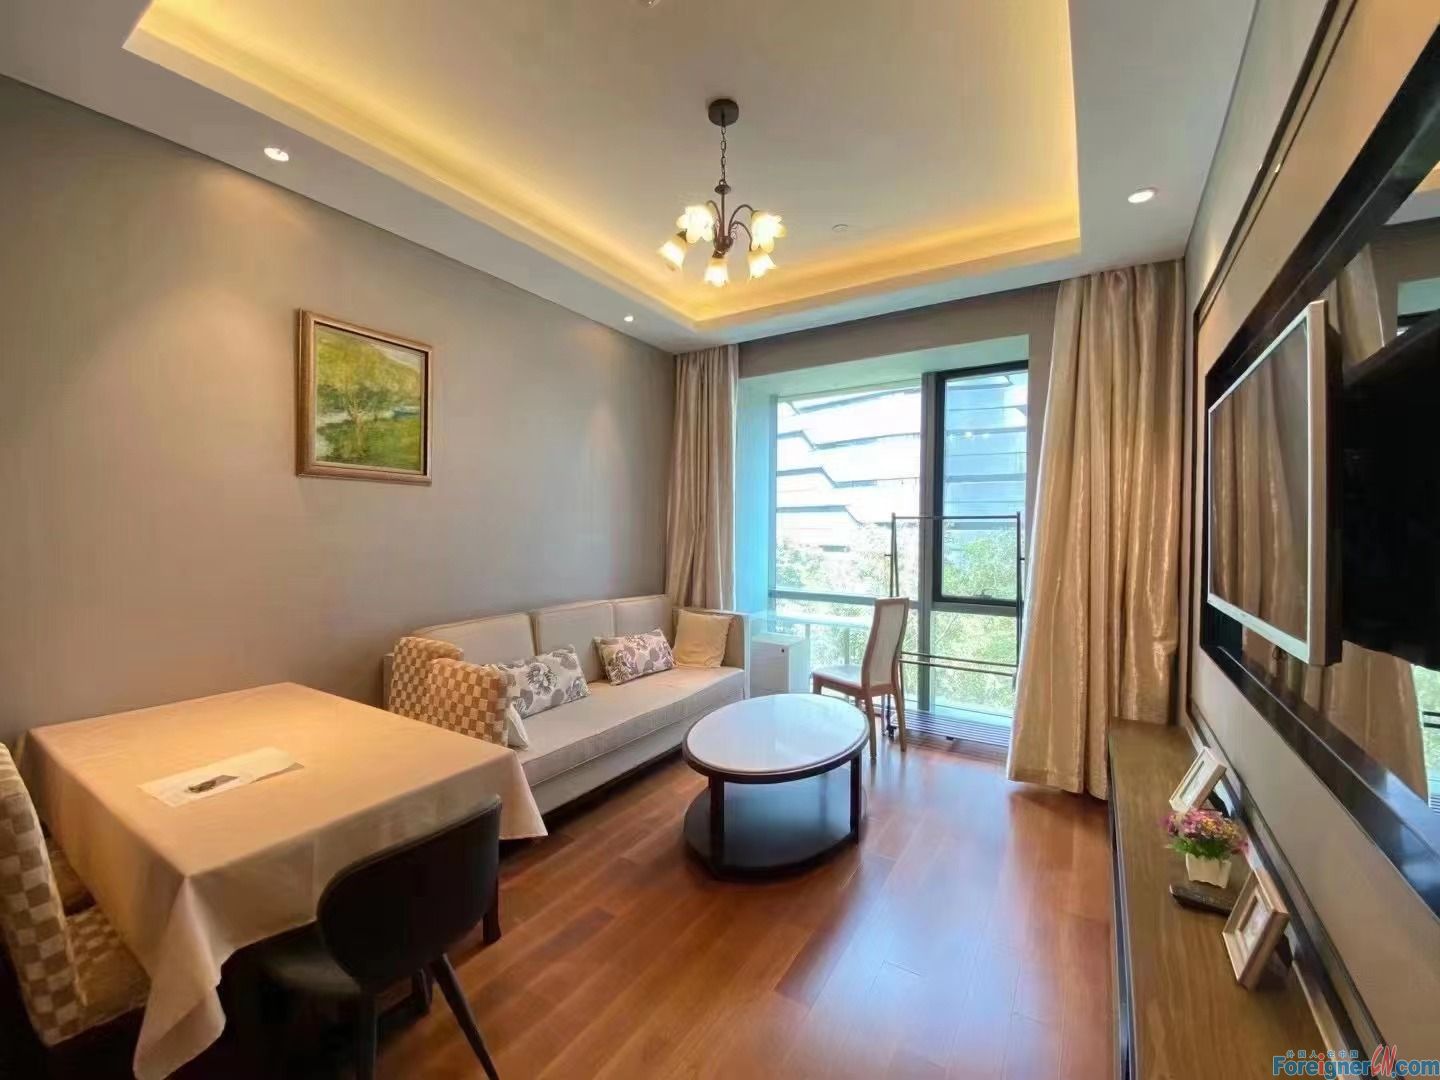 Stunning !!！HLCC apartment to rent in Suzhou SIP/ 1 bedroom and 1 bathroom/Equipped with Central AC ,cozy room and well-kept/Times Square nearby/Subway station